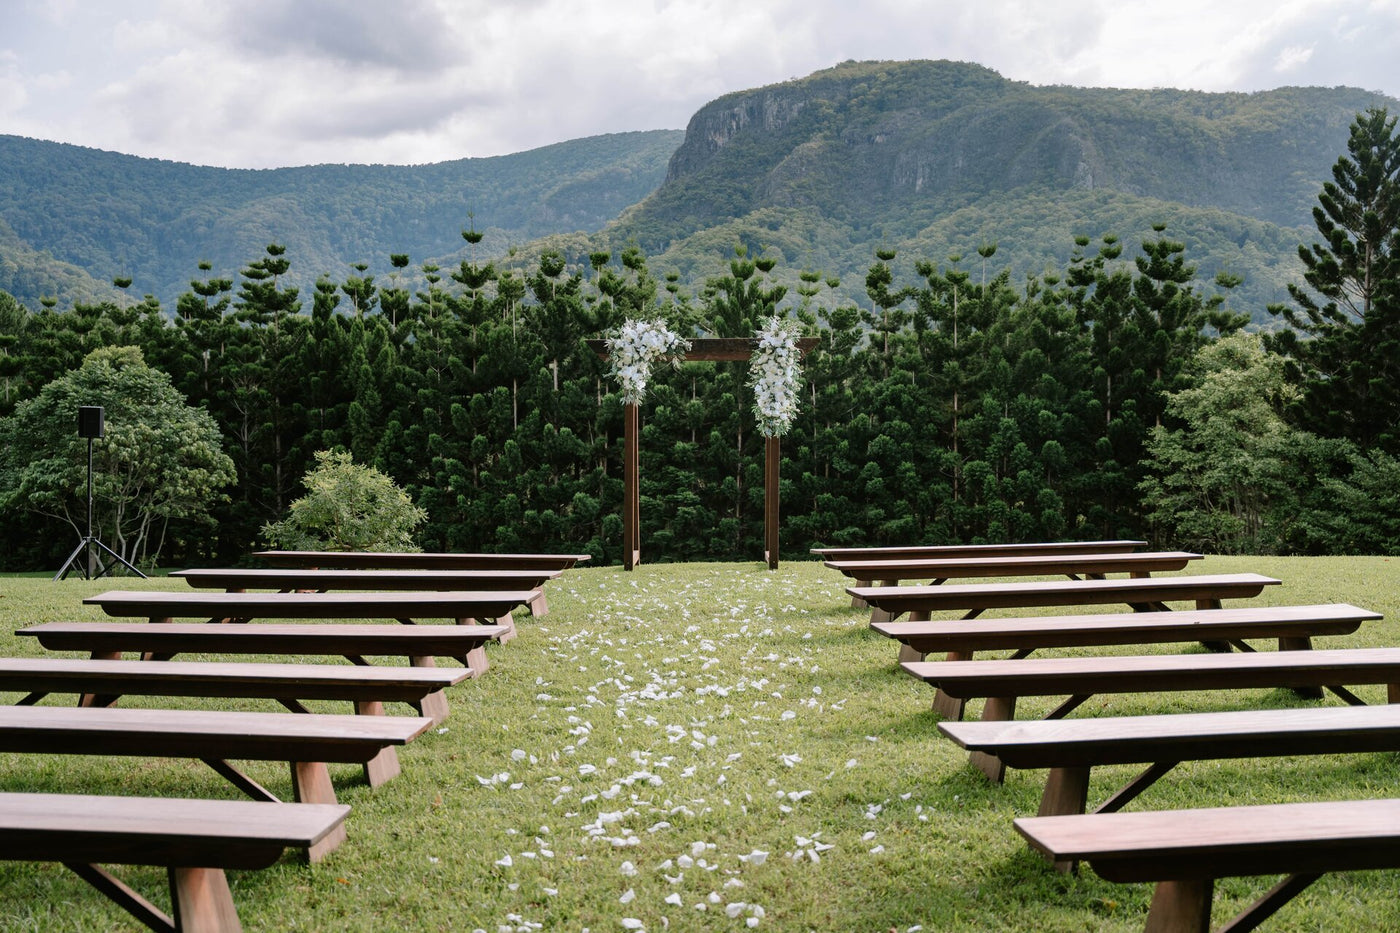 Wedding venue set up in a highland location with a breathtaking view of trees and mountains.